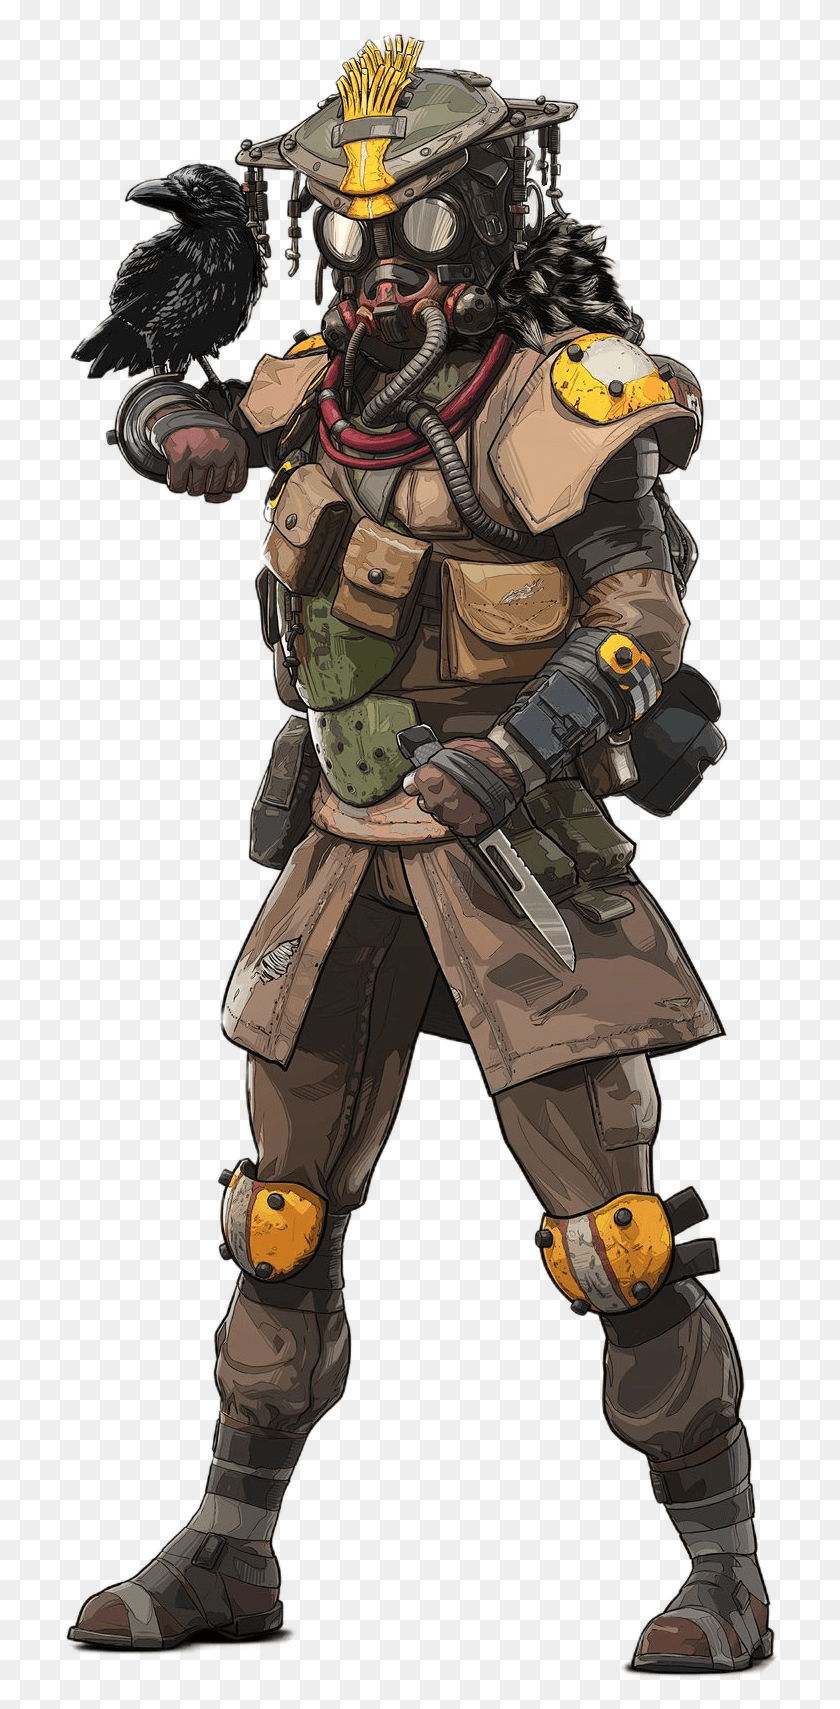 716x1649 Descargar Png Bloodhound Apex Legends Bloodhound, Persona, Humano, Ropa Hd Png